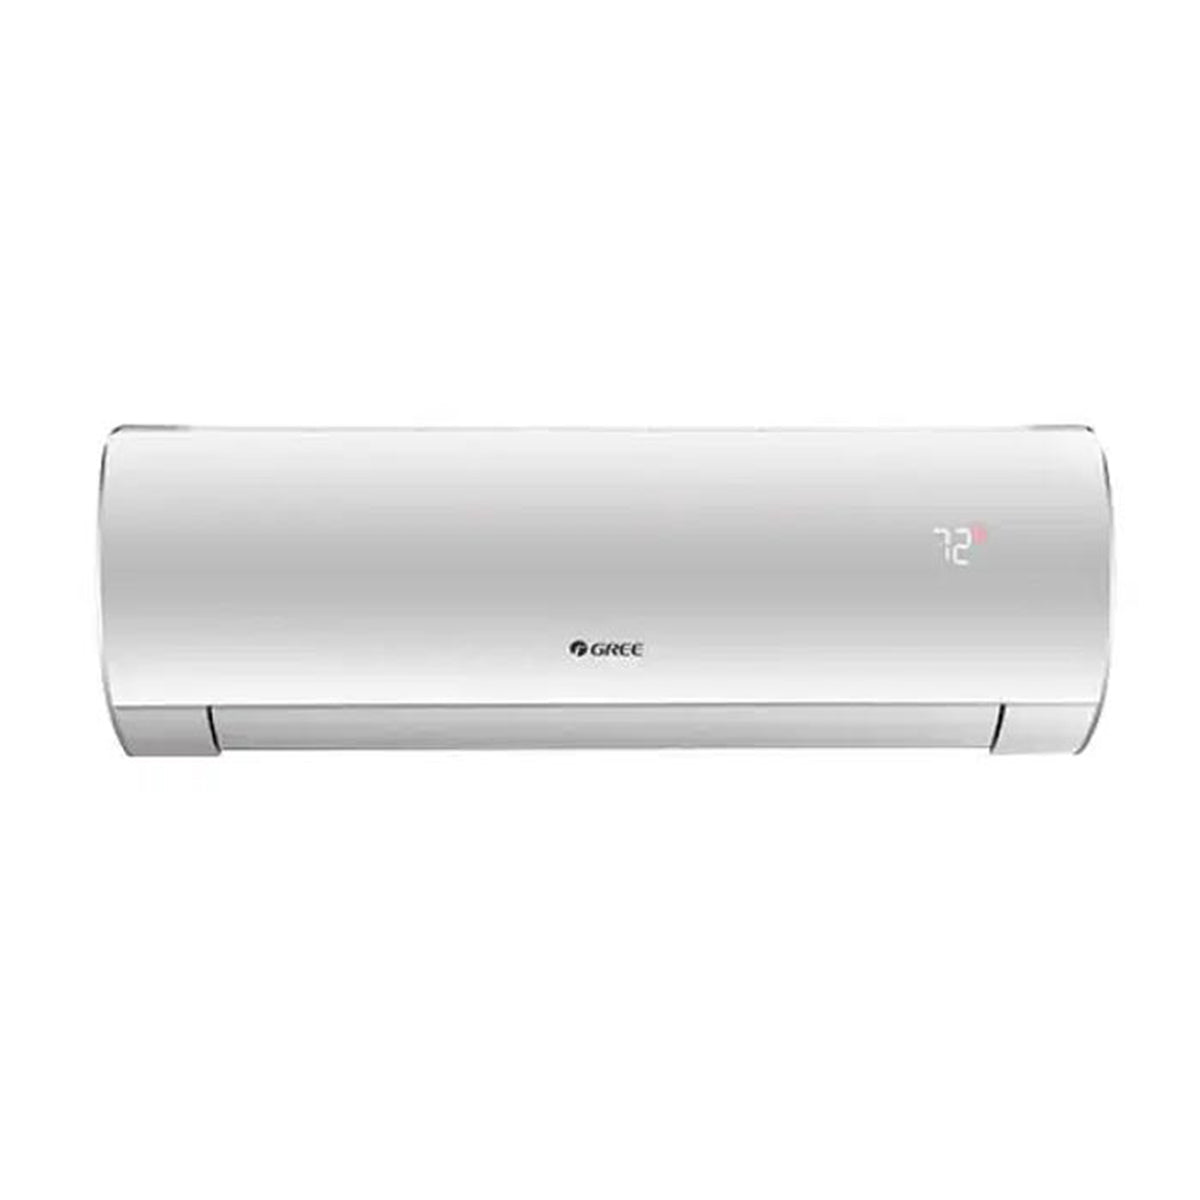 Gree Air Conditioner 1 Ton - GS-12FITH6C/6S/6G Inverter 65% Savings